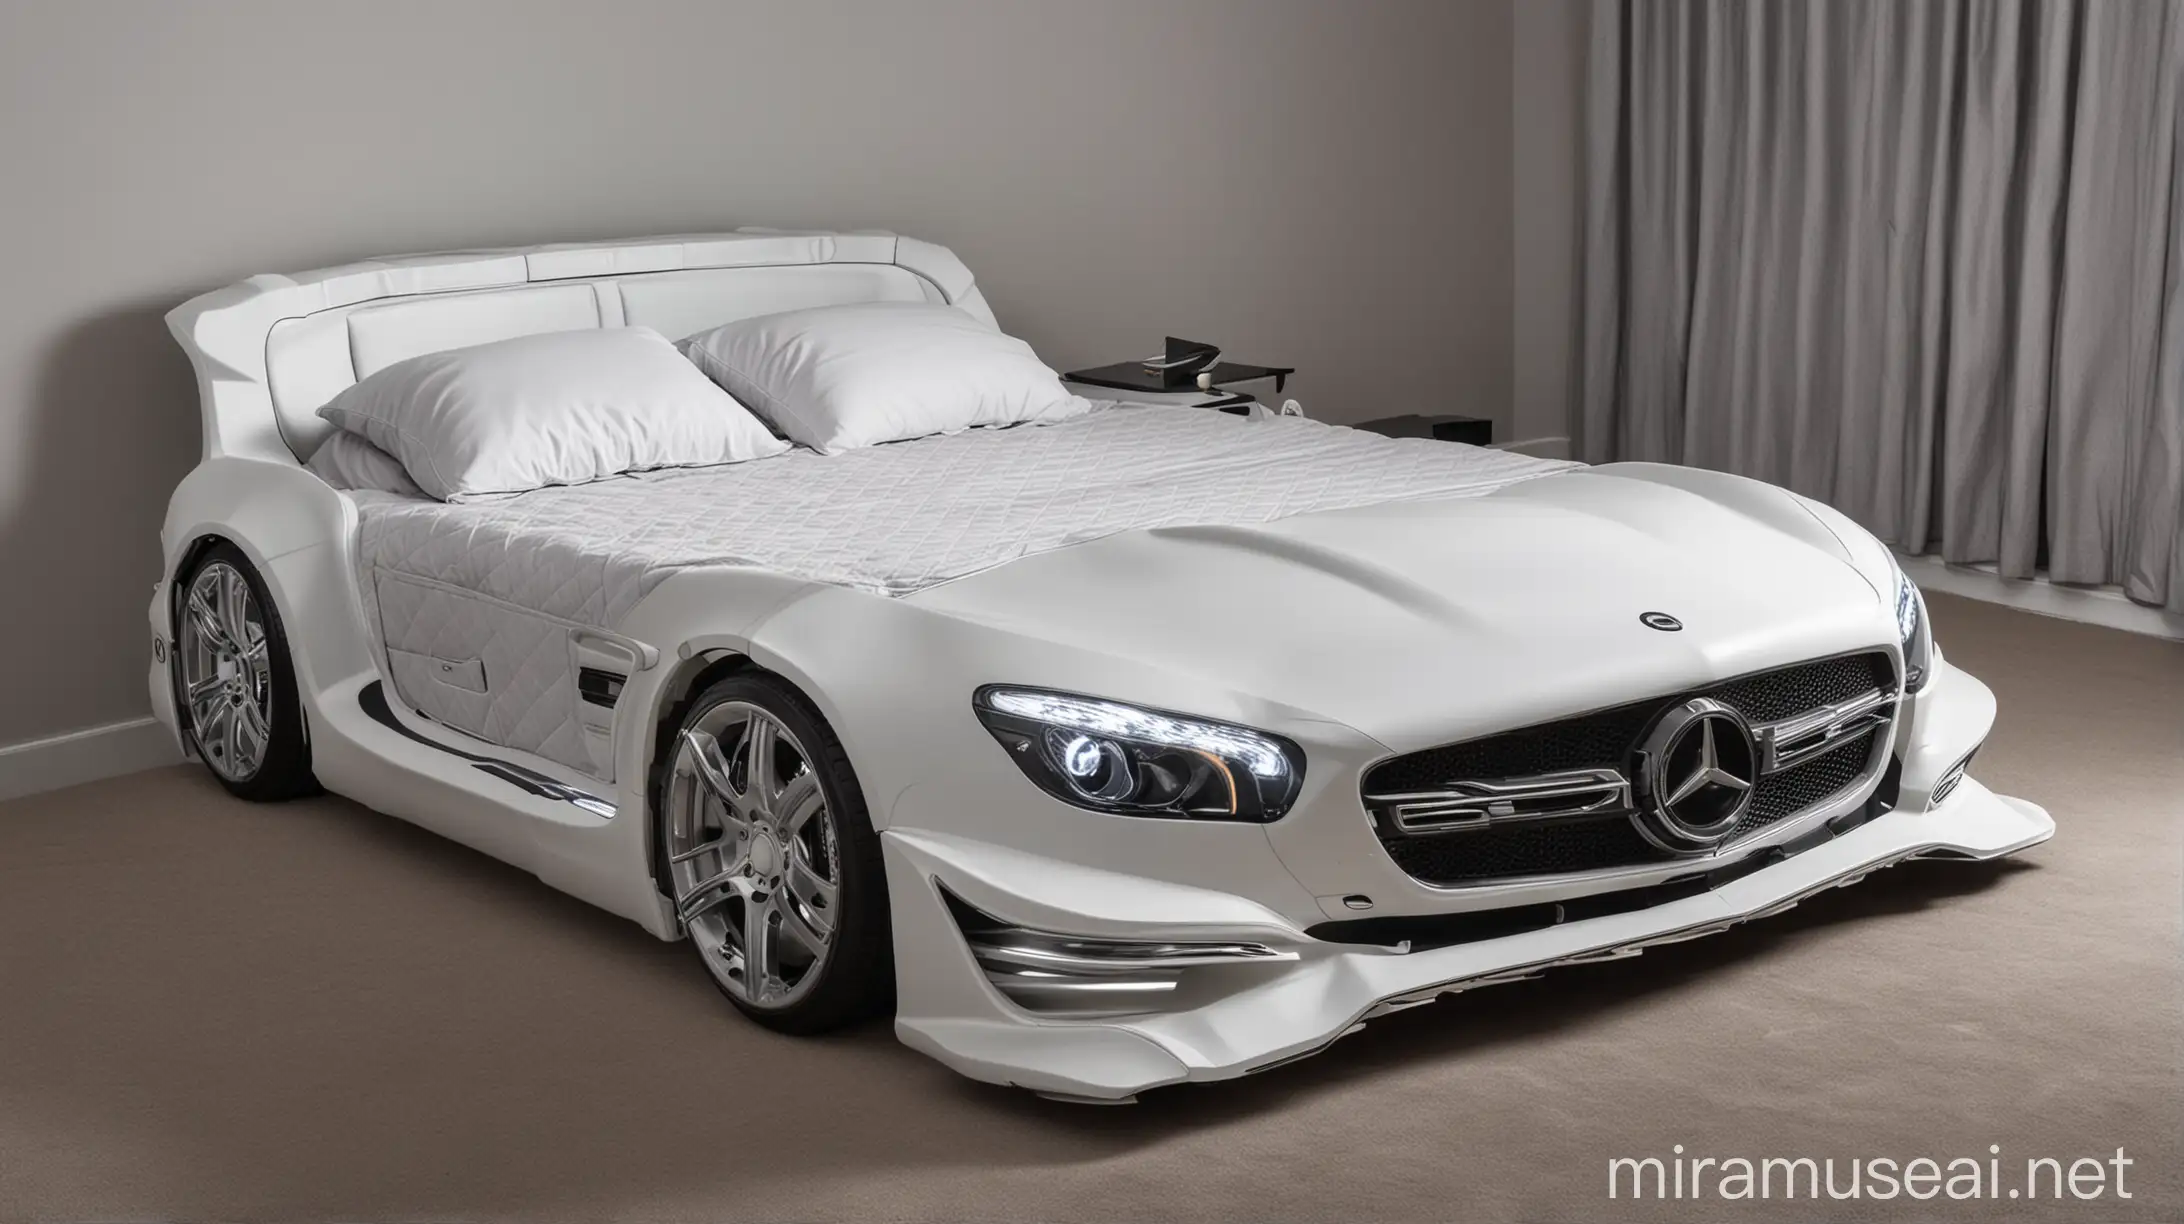 Double bed in the shape of a Mercedes amg car with headlights on